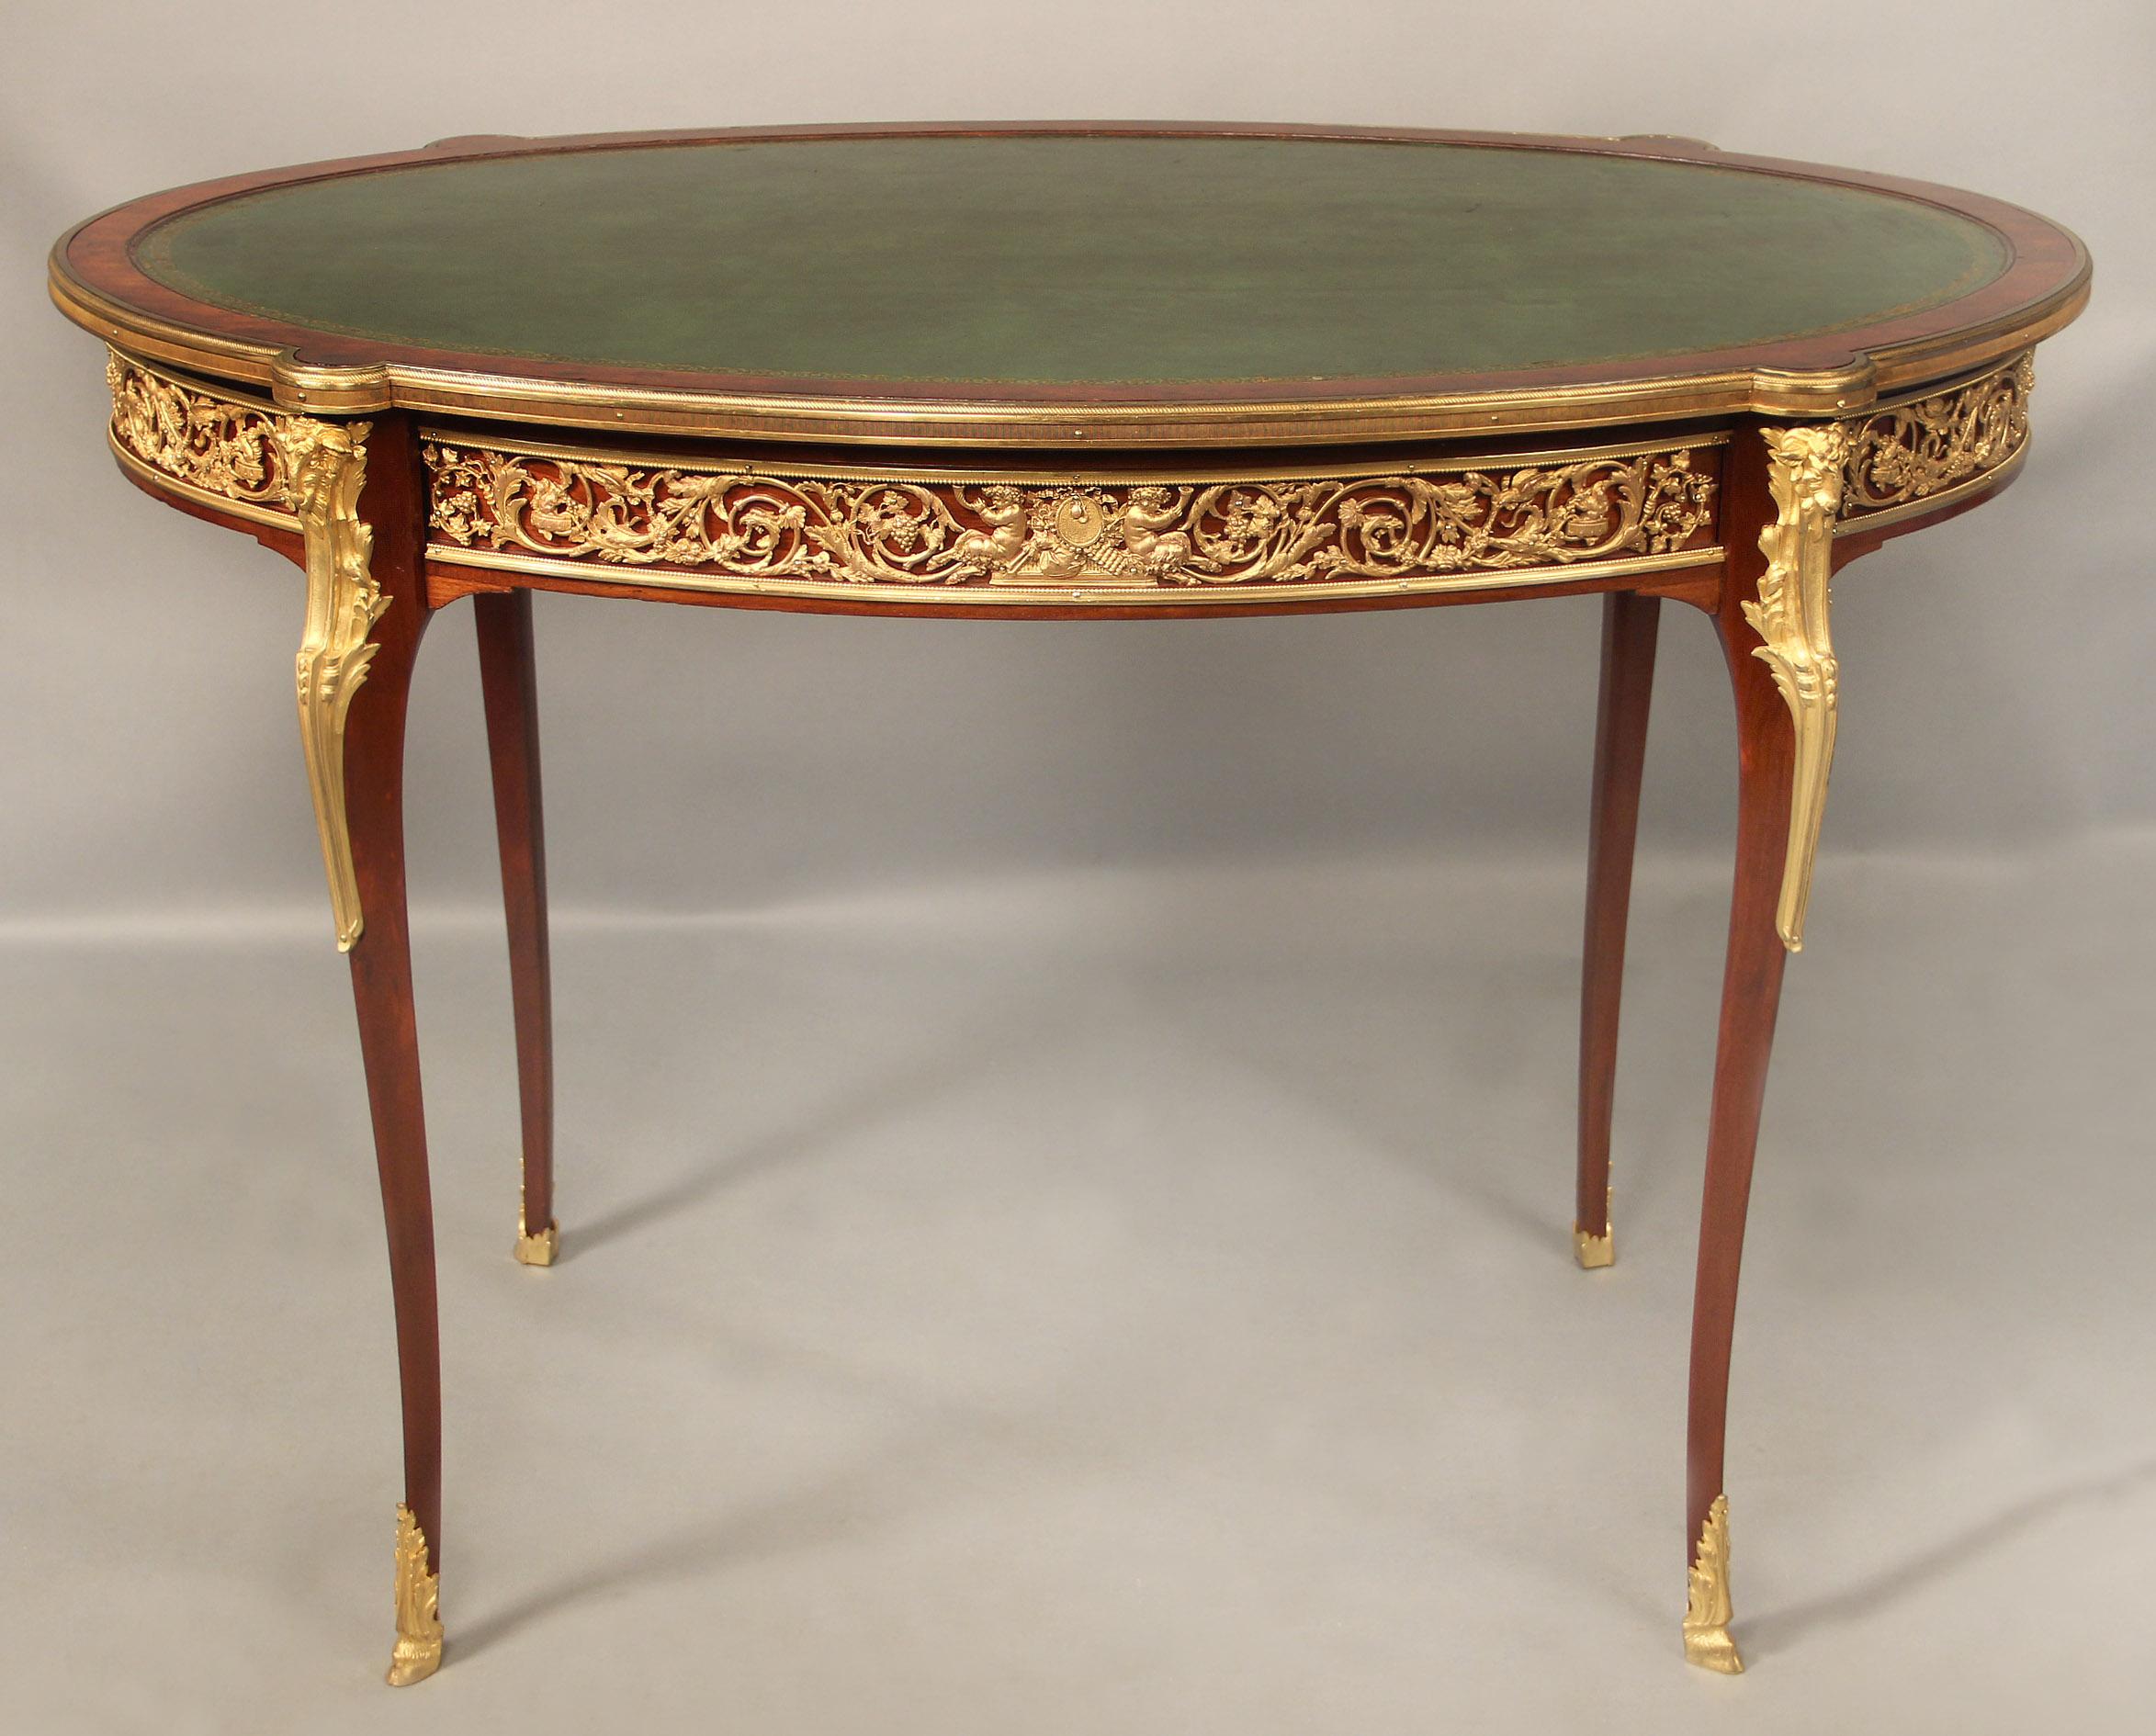 A fine late 19th century gilt bronze-mounted Louis XV style table

The shaped oval leather top with a molded border, above a foliated frieze centered to the front and back by satyrs and musical trophies, the front opening as a drawer, on four